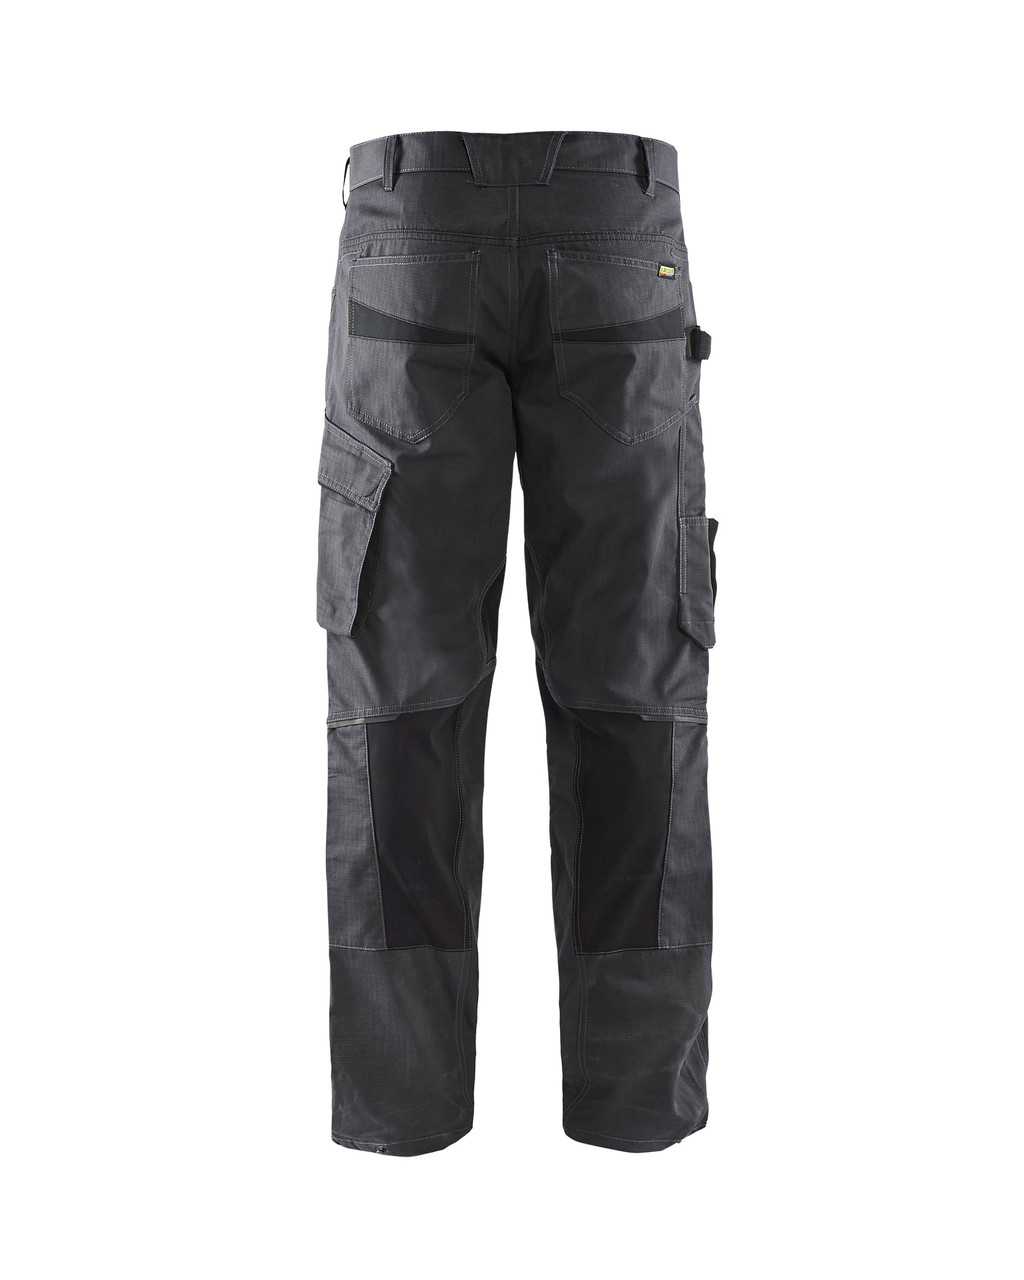 Buy online in Australia and New Zealand BLAKLADER Trousers for Electricians that are comfortable and durable.